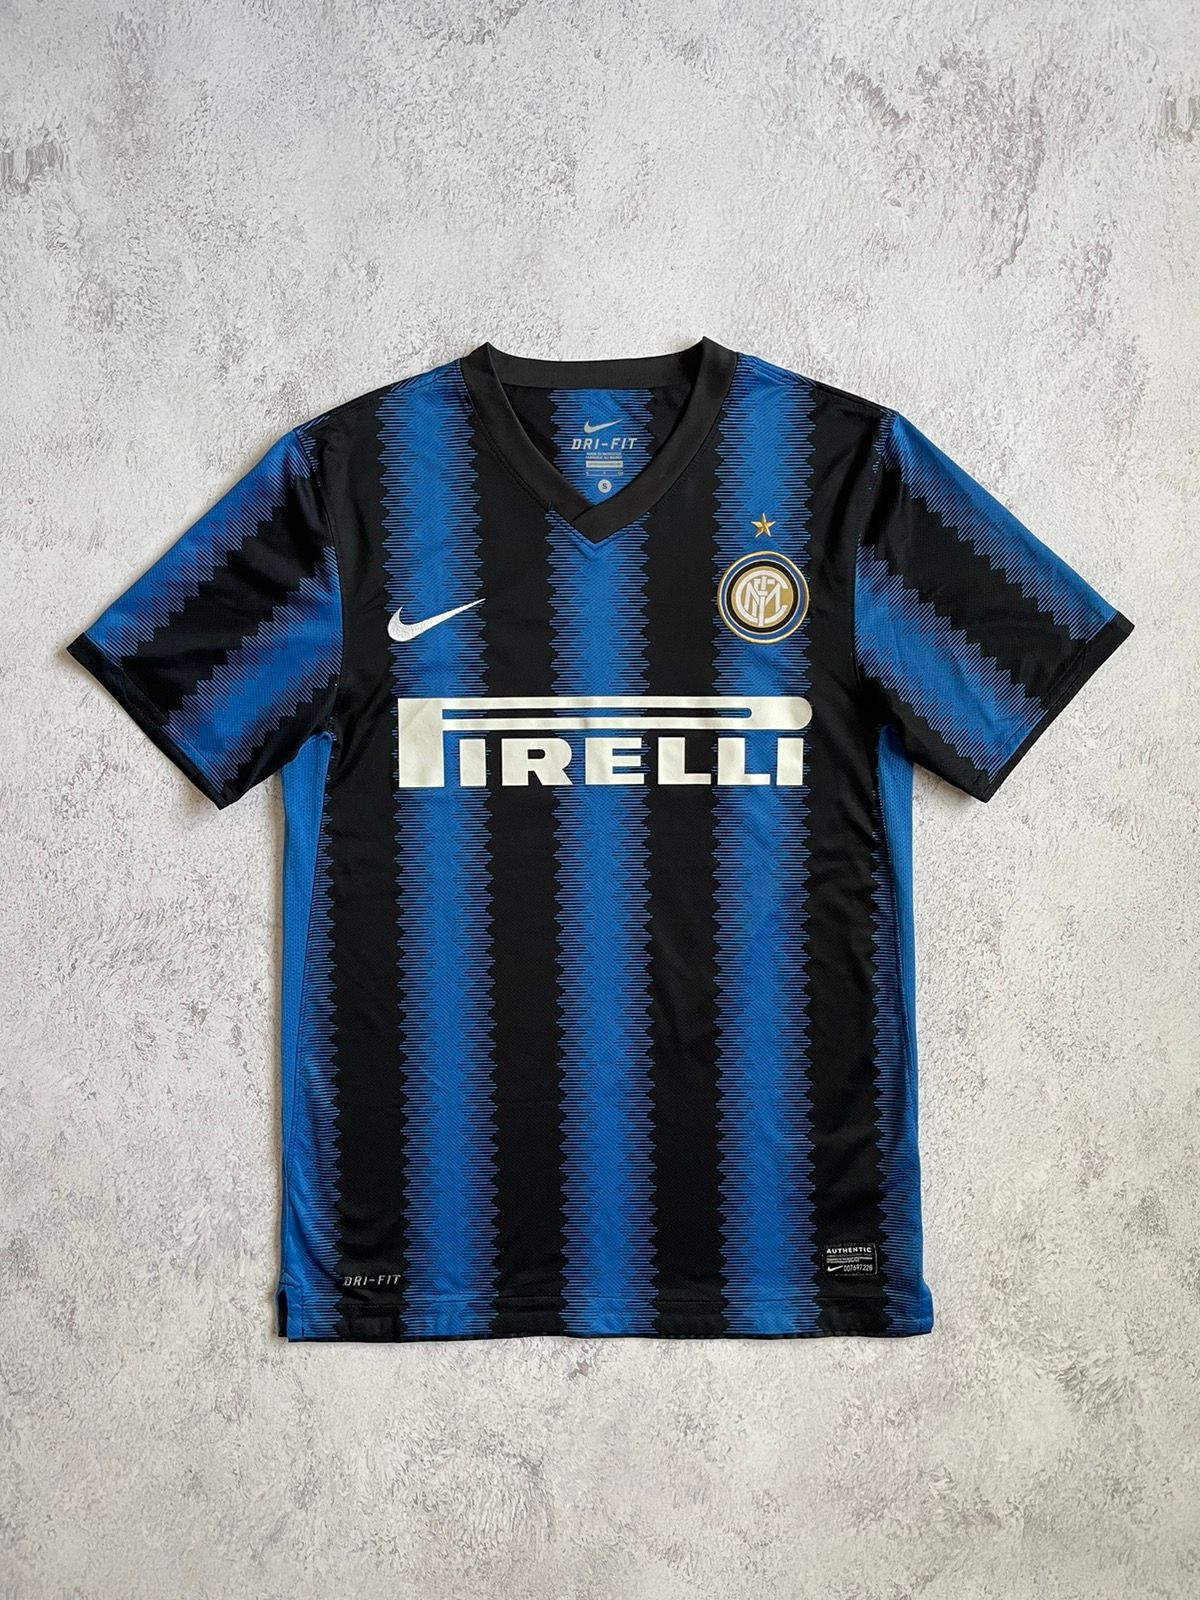 Pre-owned Nike X Soccer Jersey Nike Inter Milan 2010/2011 Home Football Jersey In Black Blue